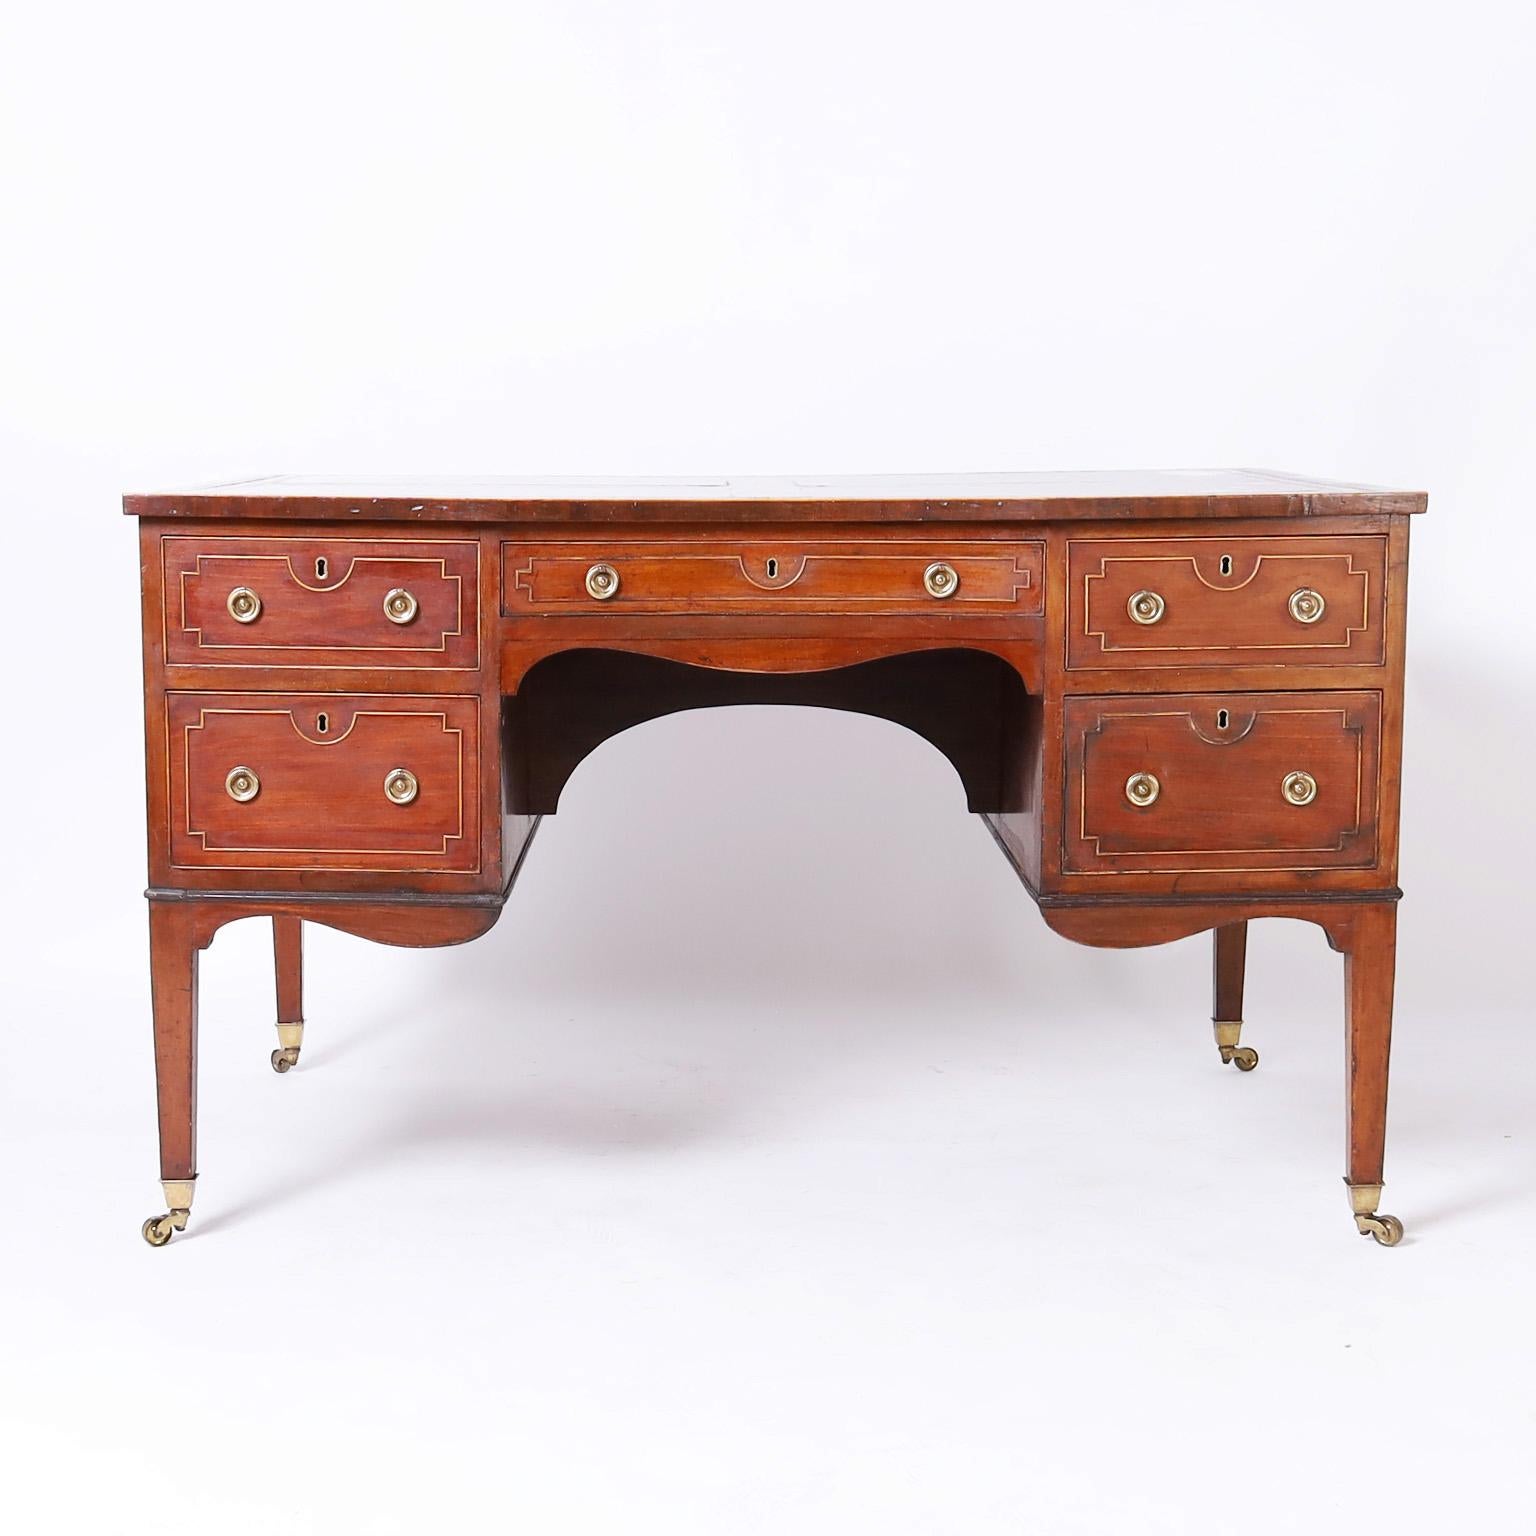 Impressive 19th century French partners desk with a tooled red leather top over a case crafted in mahogany with four drawers on either side decorated with beaded geometric designs, featuring a scrolled skirt and tapered legs on brass casters.